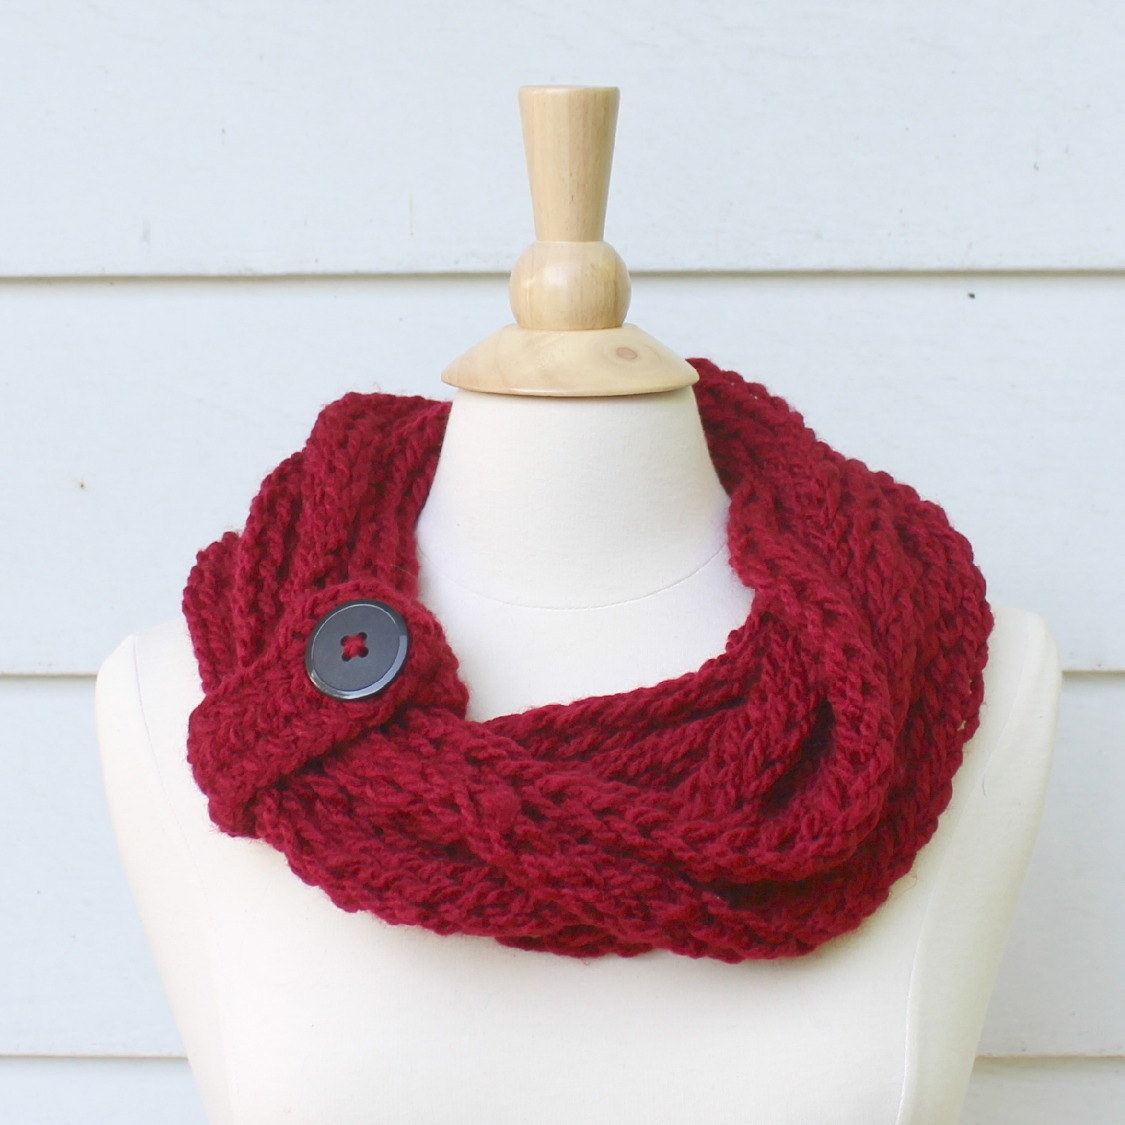 Hand Knit Chunky Cowl Scarf - Red Infinity Scarf With Crochet Closure And Button - Circle Scarf - Women's Winter Accessory - Ready To